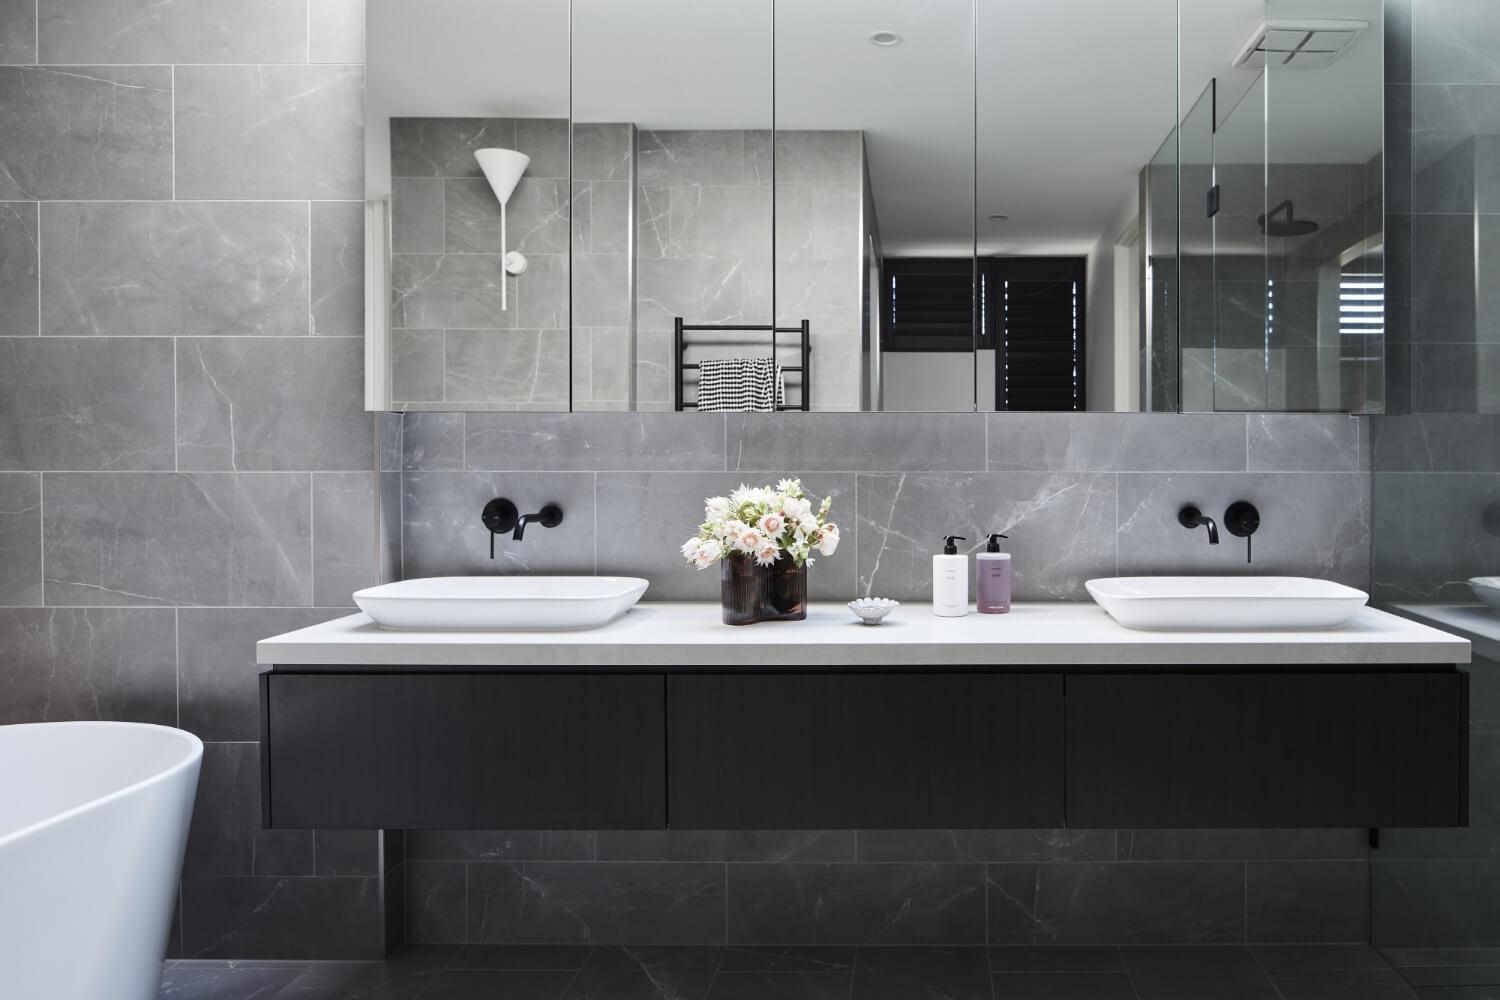 Dark Tone Vanity And Tiling Pairing With Contrasting Sinks And Bathtub